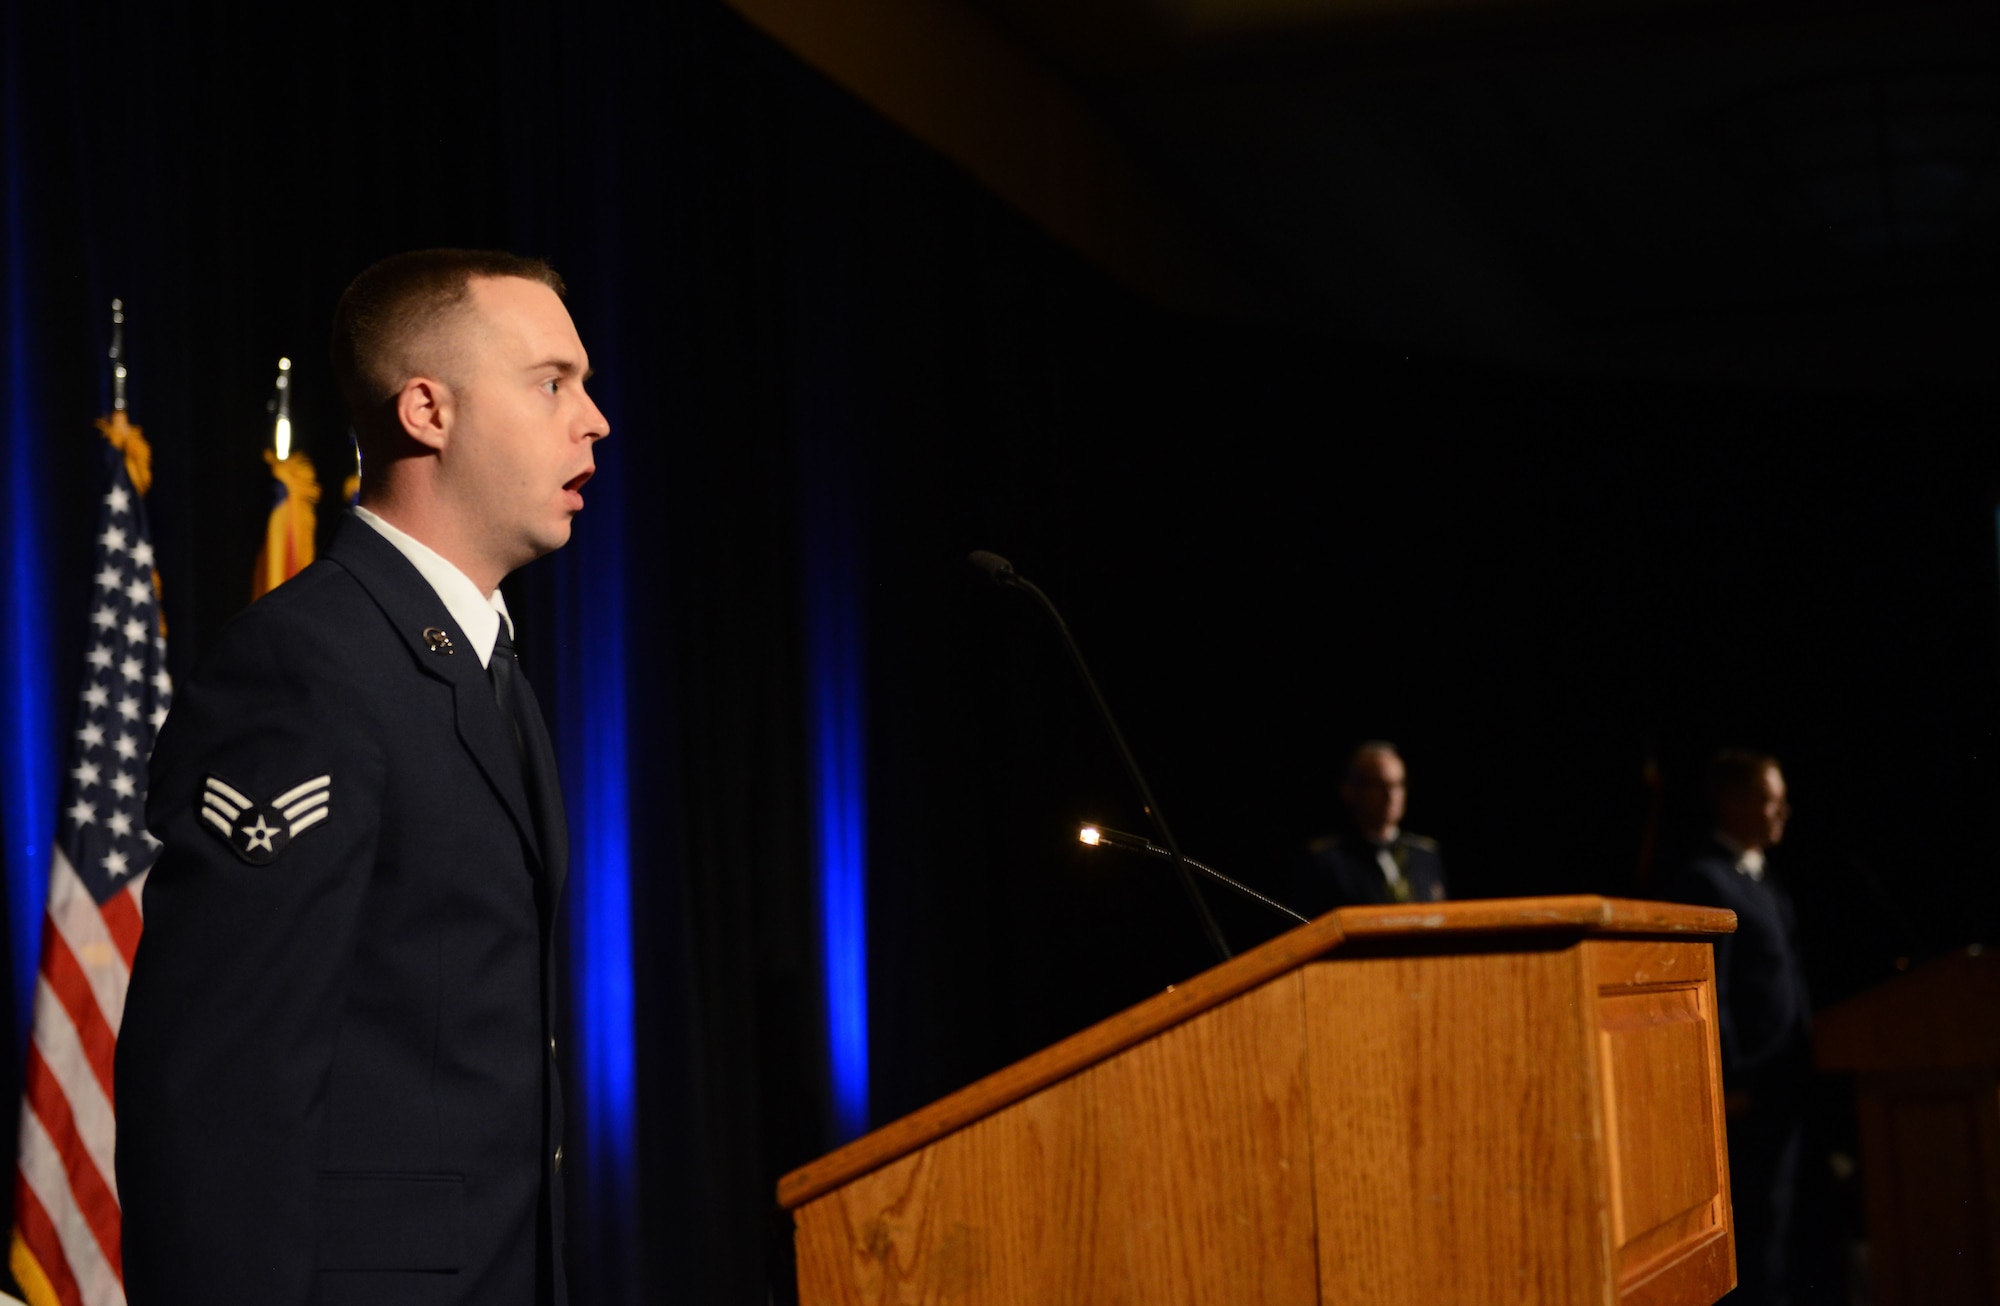 Senior Airman Timothy Orr, 944th Operations Group aviation resource manager, sings the national anthem during the 2017 Annual Awards Banquet at The Wigwam in Litchfield Park, Ariz., Jan. 20, 2018. The 2017 Annual Awards Banquet was held to recognize and award the best and brightest Airmen from Luke Air Force Base. (U.S. Air Force Photo/Airman 1st Class Alexander Cook)